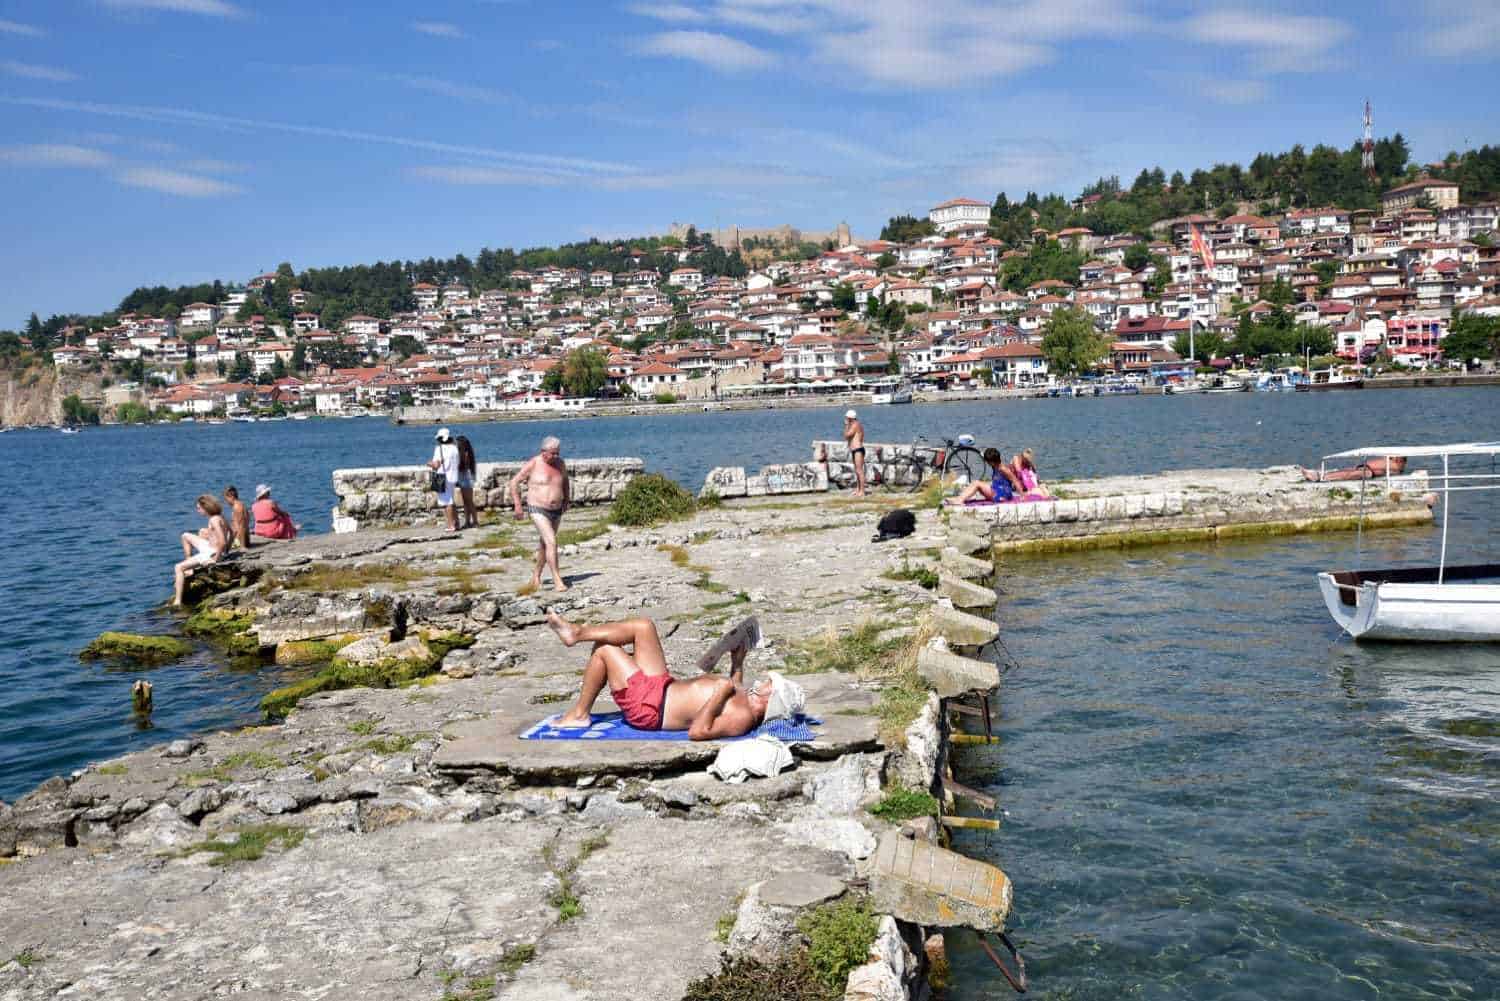 What to see in Ohrid